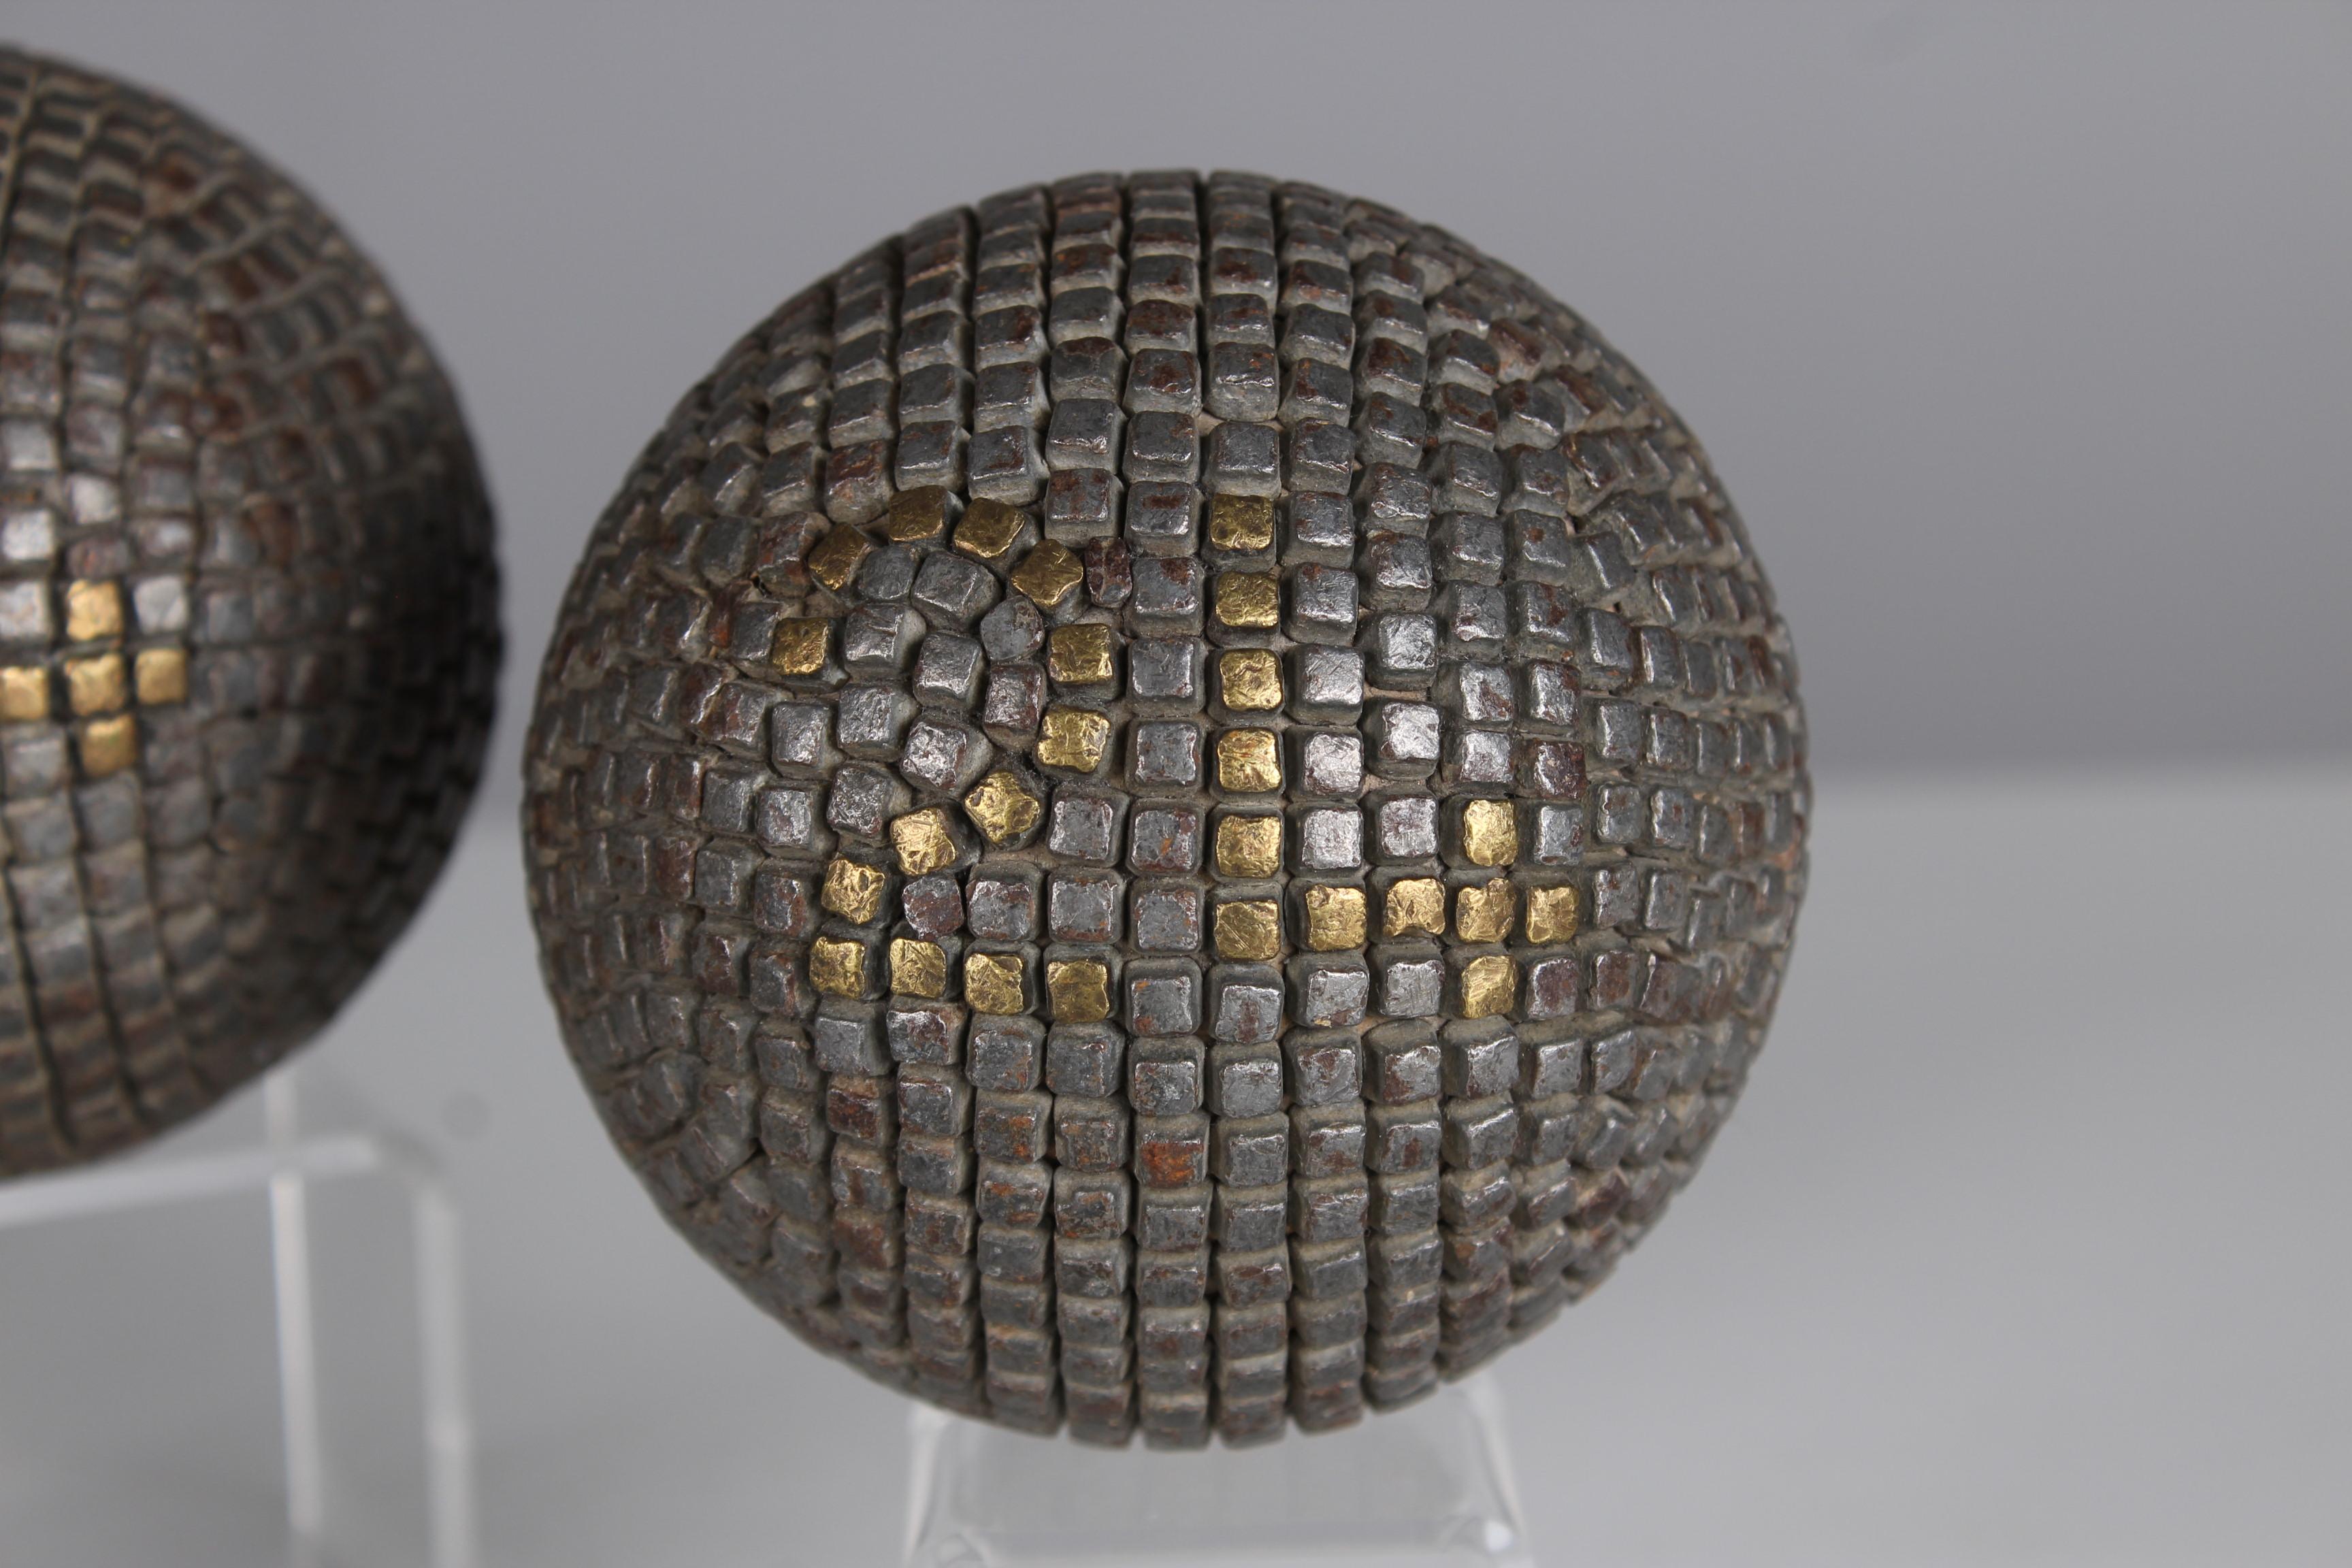 Beautiful, unique Boule ball pair and one target ball, France, late 19th Century.

In the 19th century, the manufacture of boules balls underwent significant development in France as the game of boules, particularly the pétanque variant, gained in